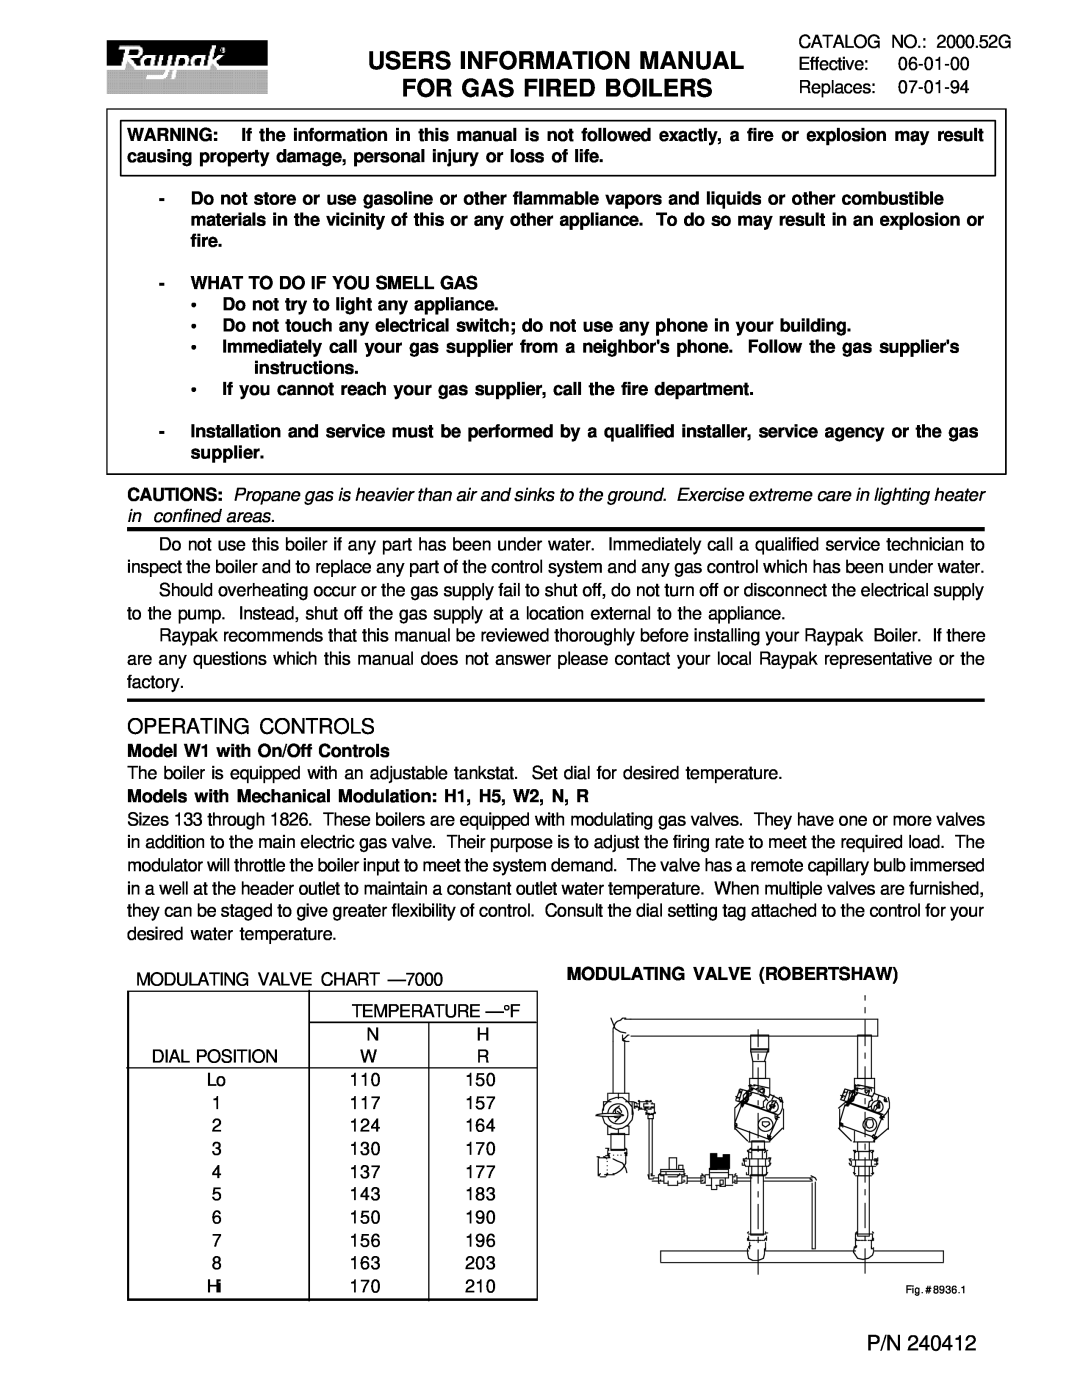 Raypak manual Users Information Manual For Gas Fired Boilers, What To Do If You Smell Gas, Modulating Valve Robertshaw 